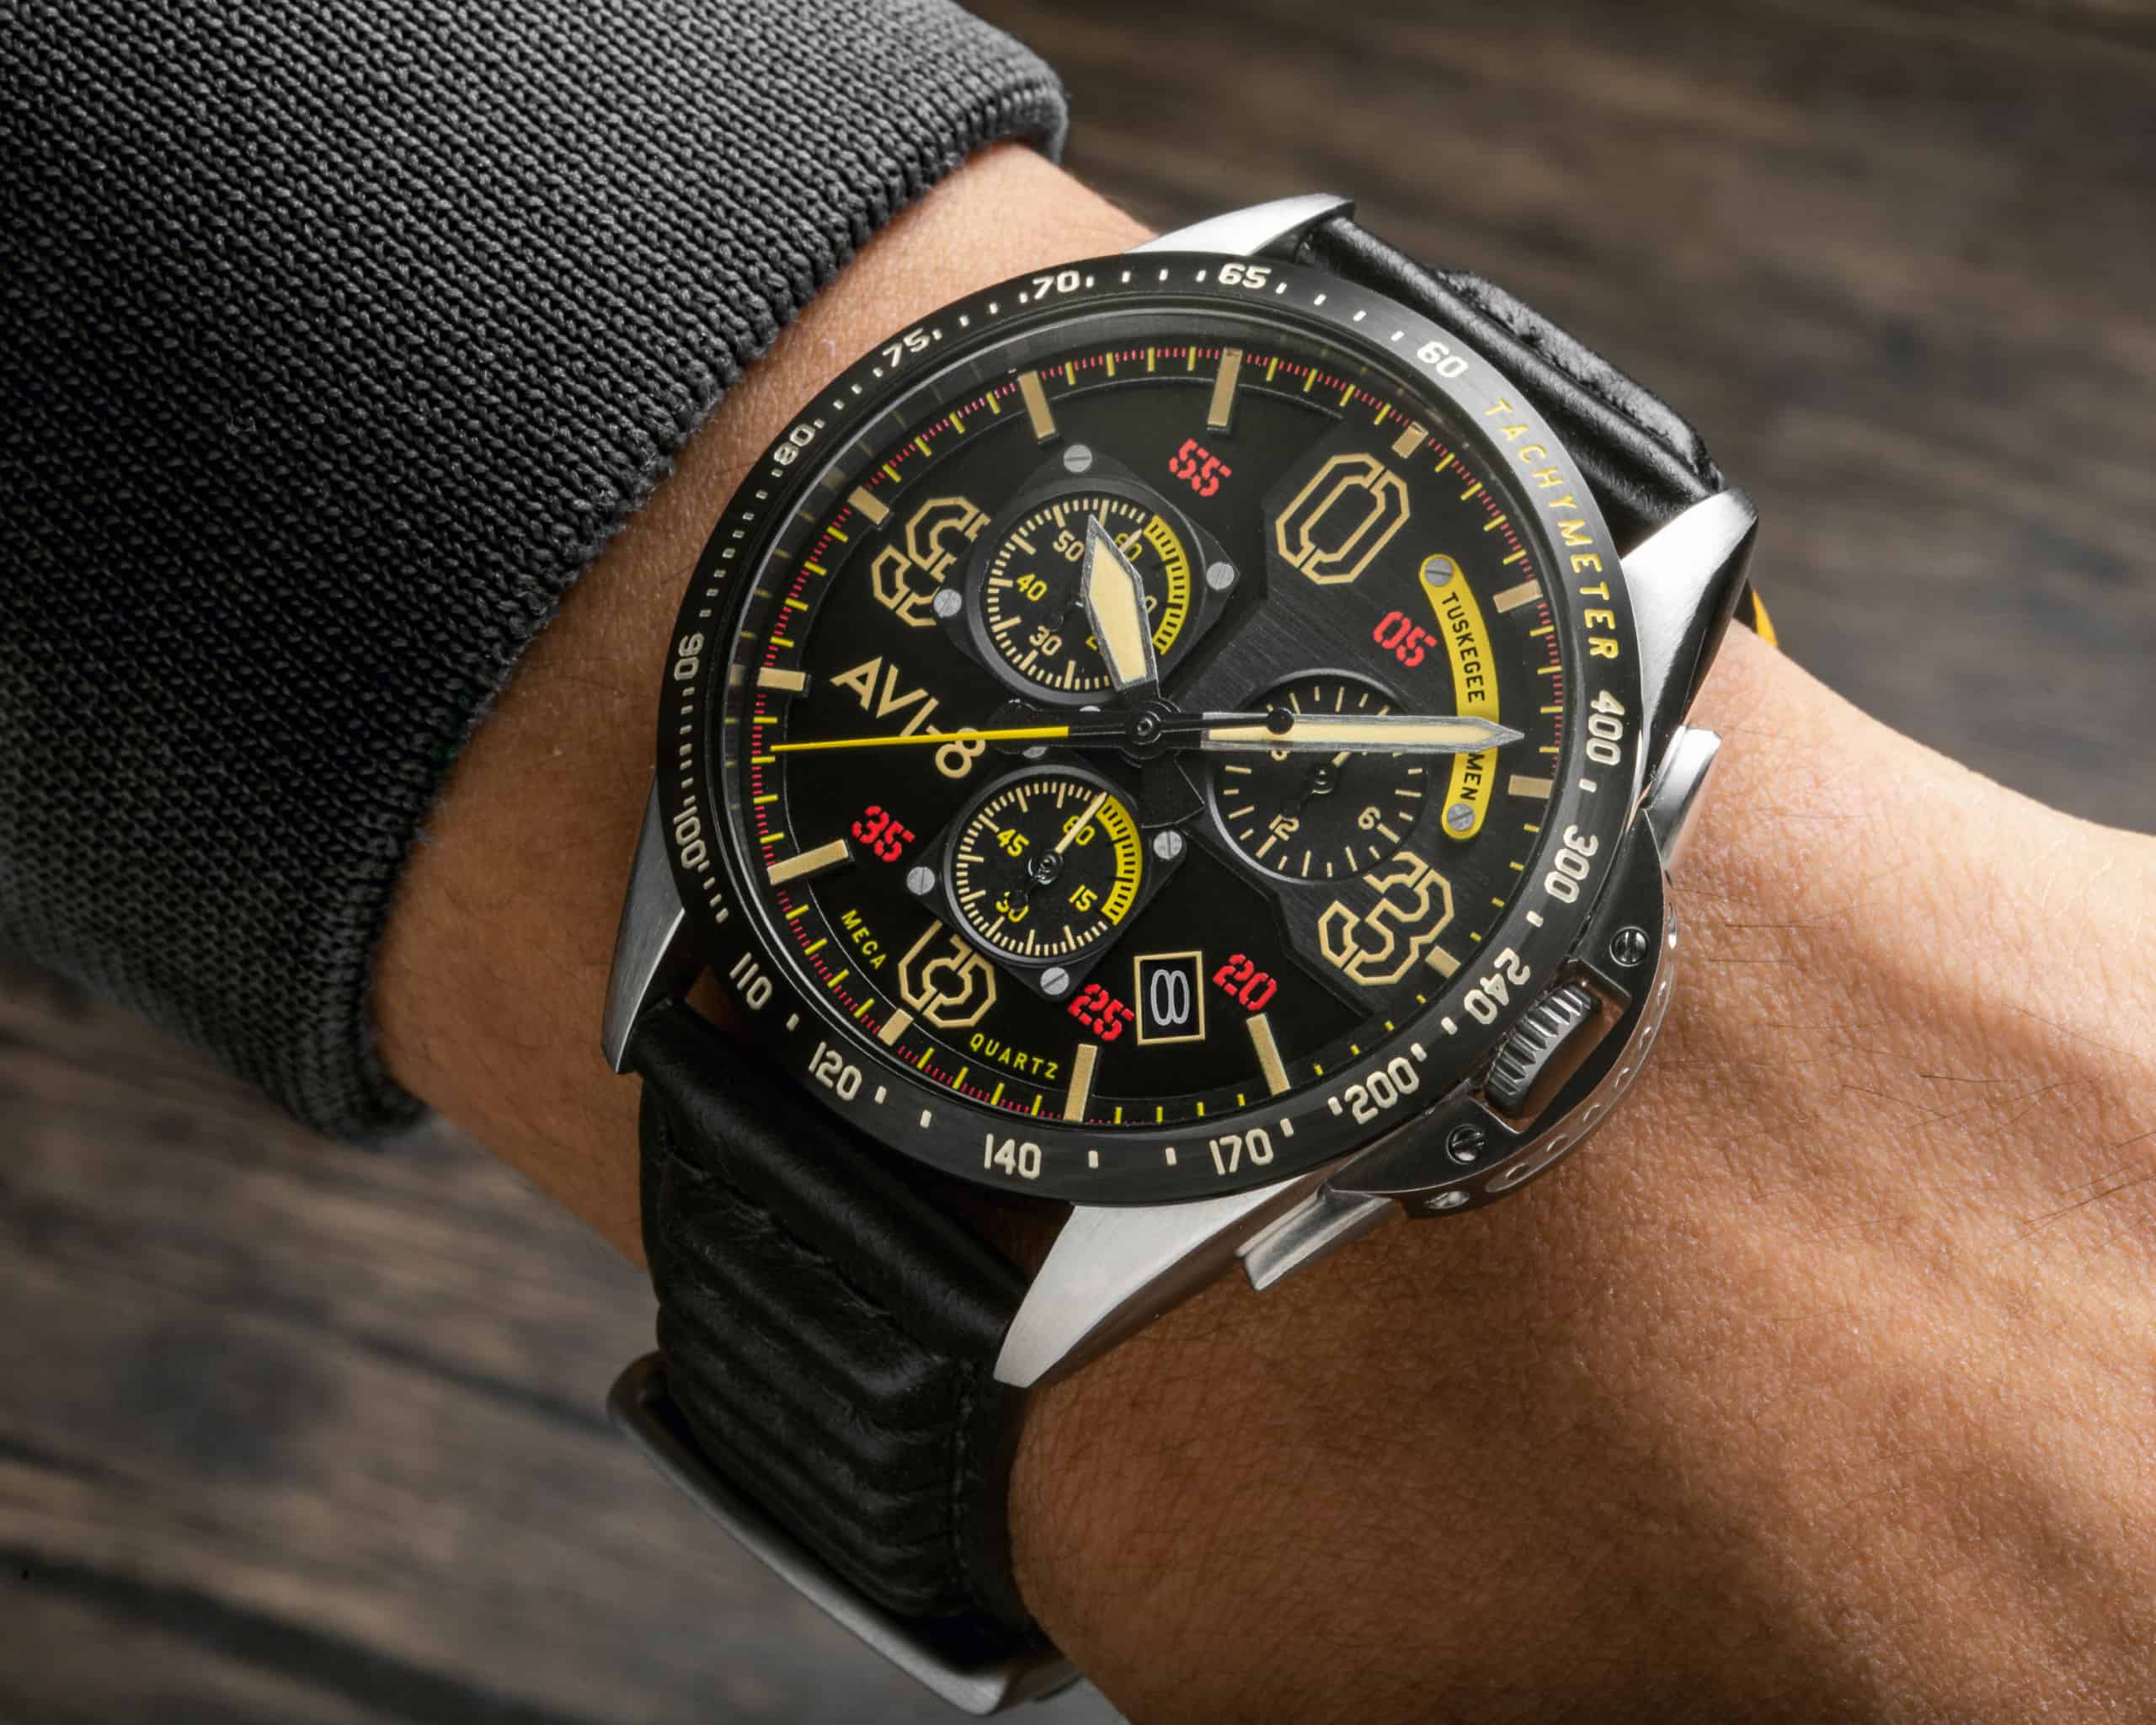 AVI-8 Honors The Tuskegee Airmen With A Limited Edition P-51 Mustang Chronograph